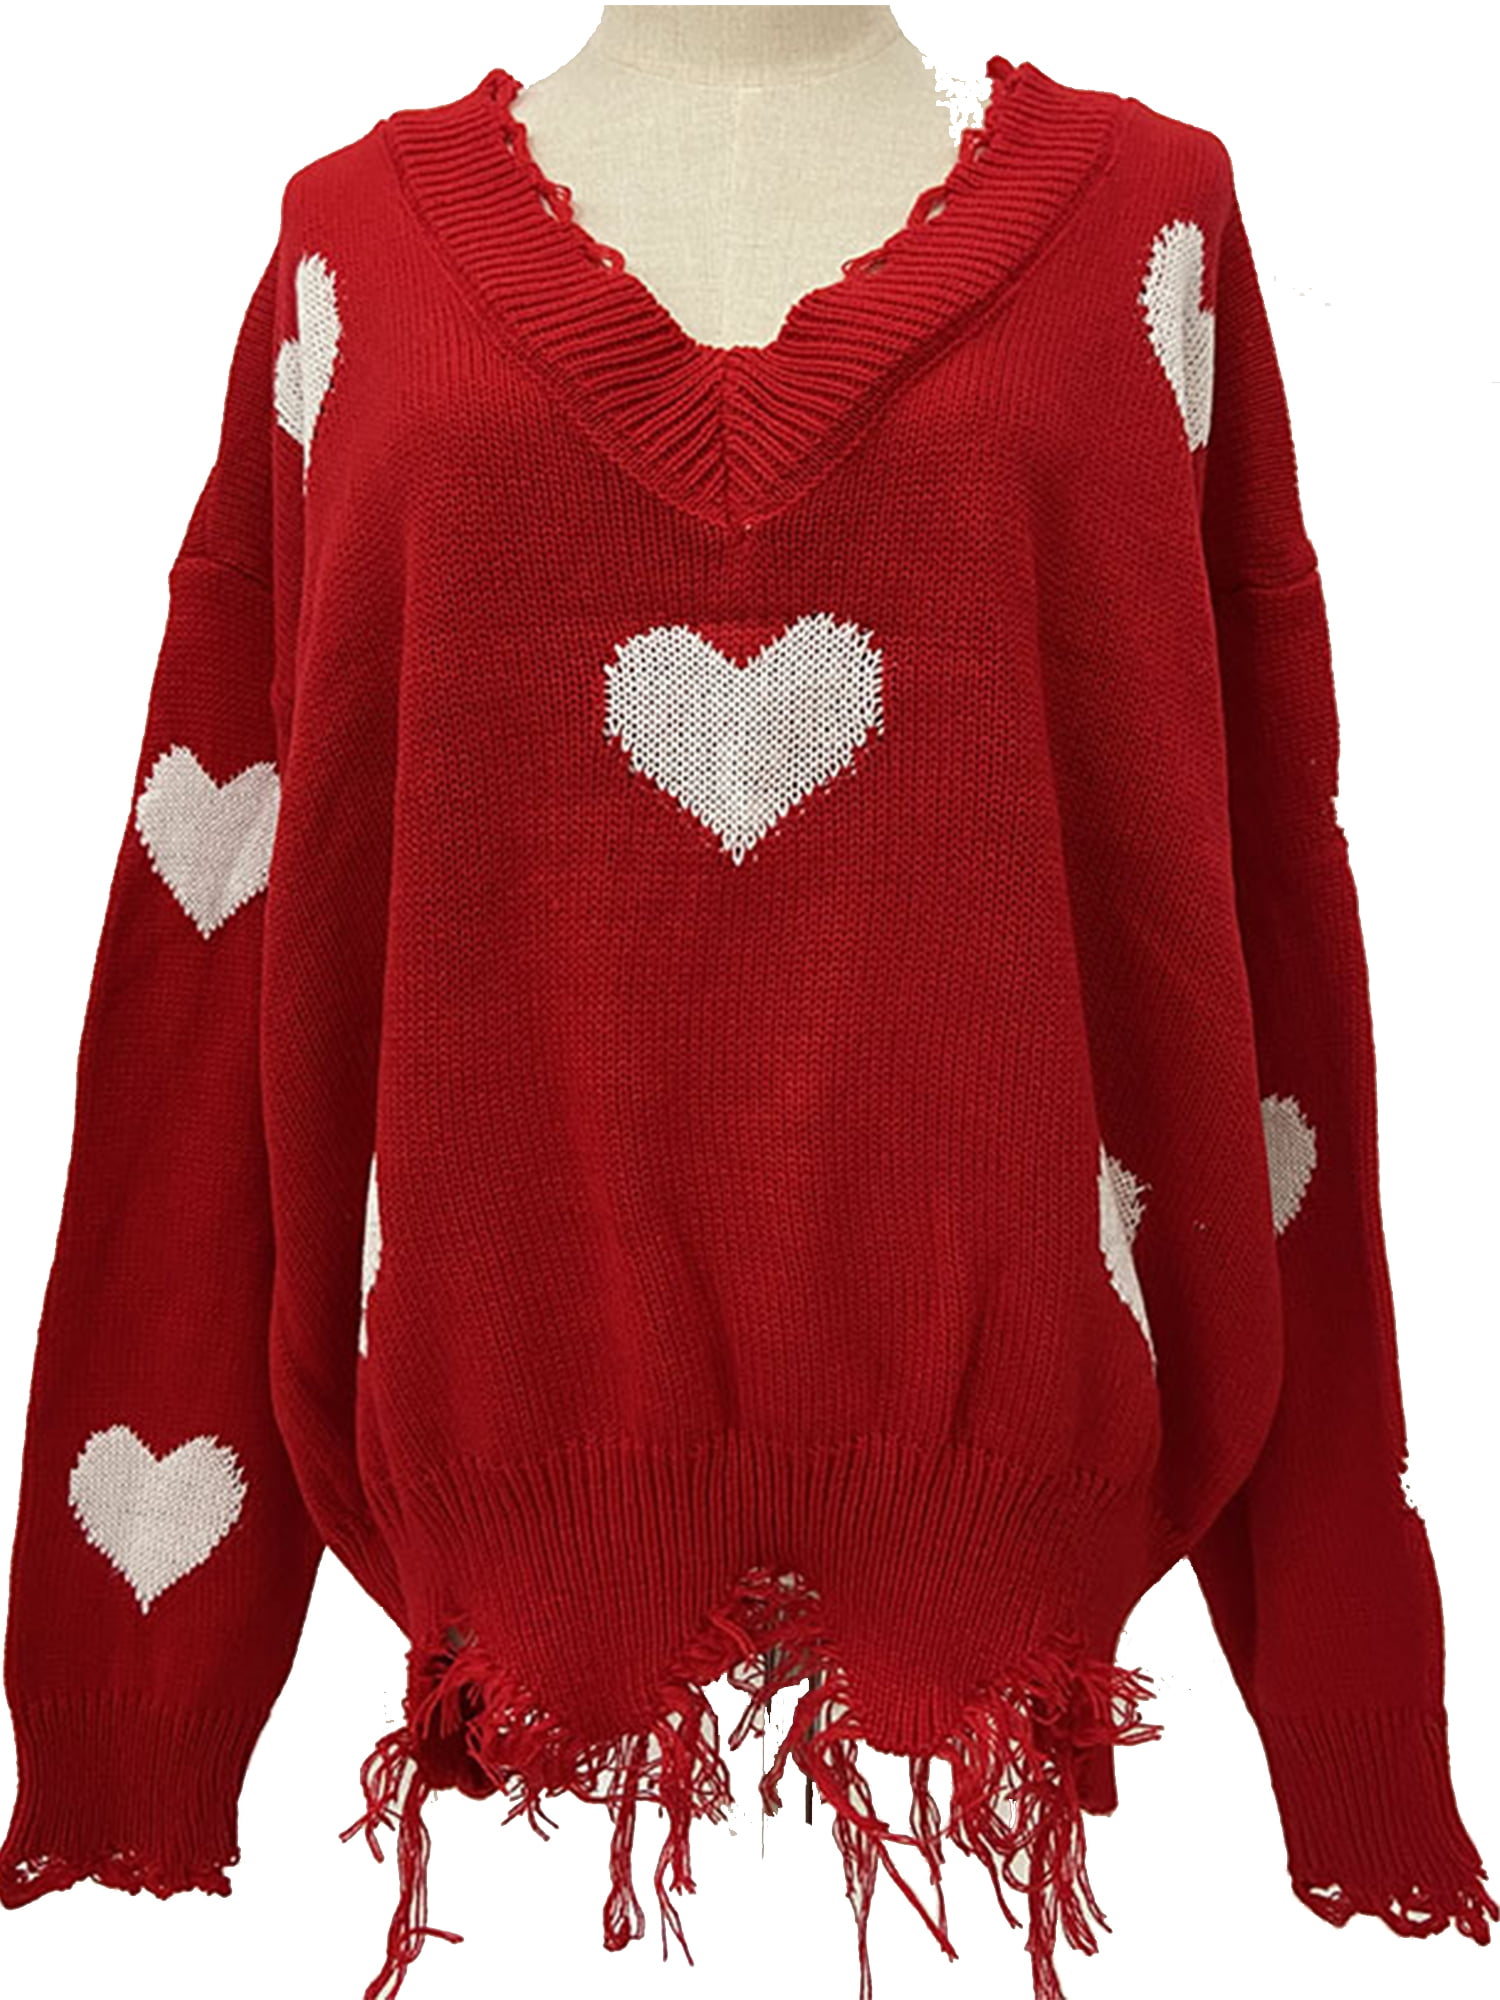 Women Sweaters and Pullovers Knitwear Letter Print red Christmas Sweater